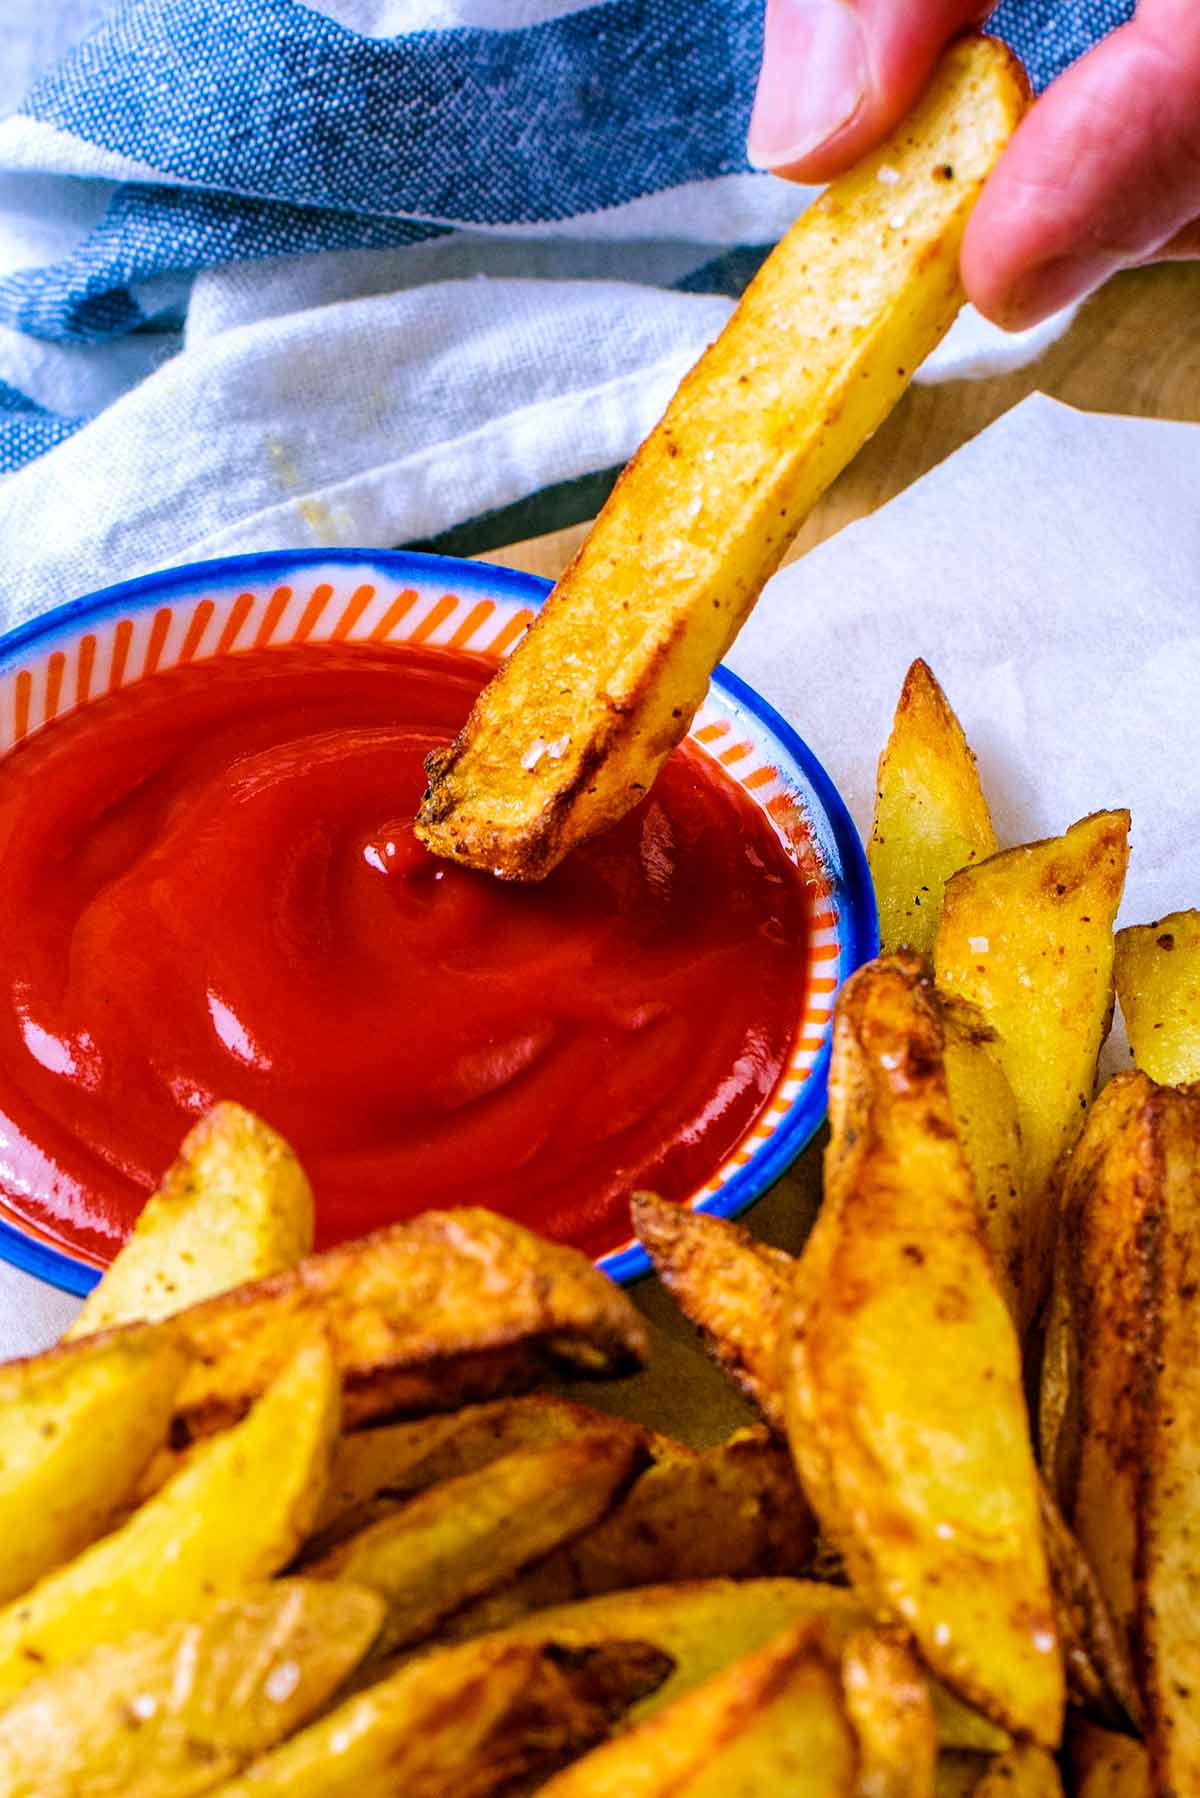 An air fried chip being dipped into some ketchup.